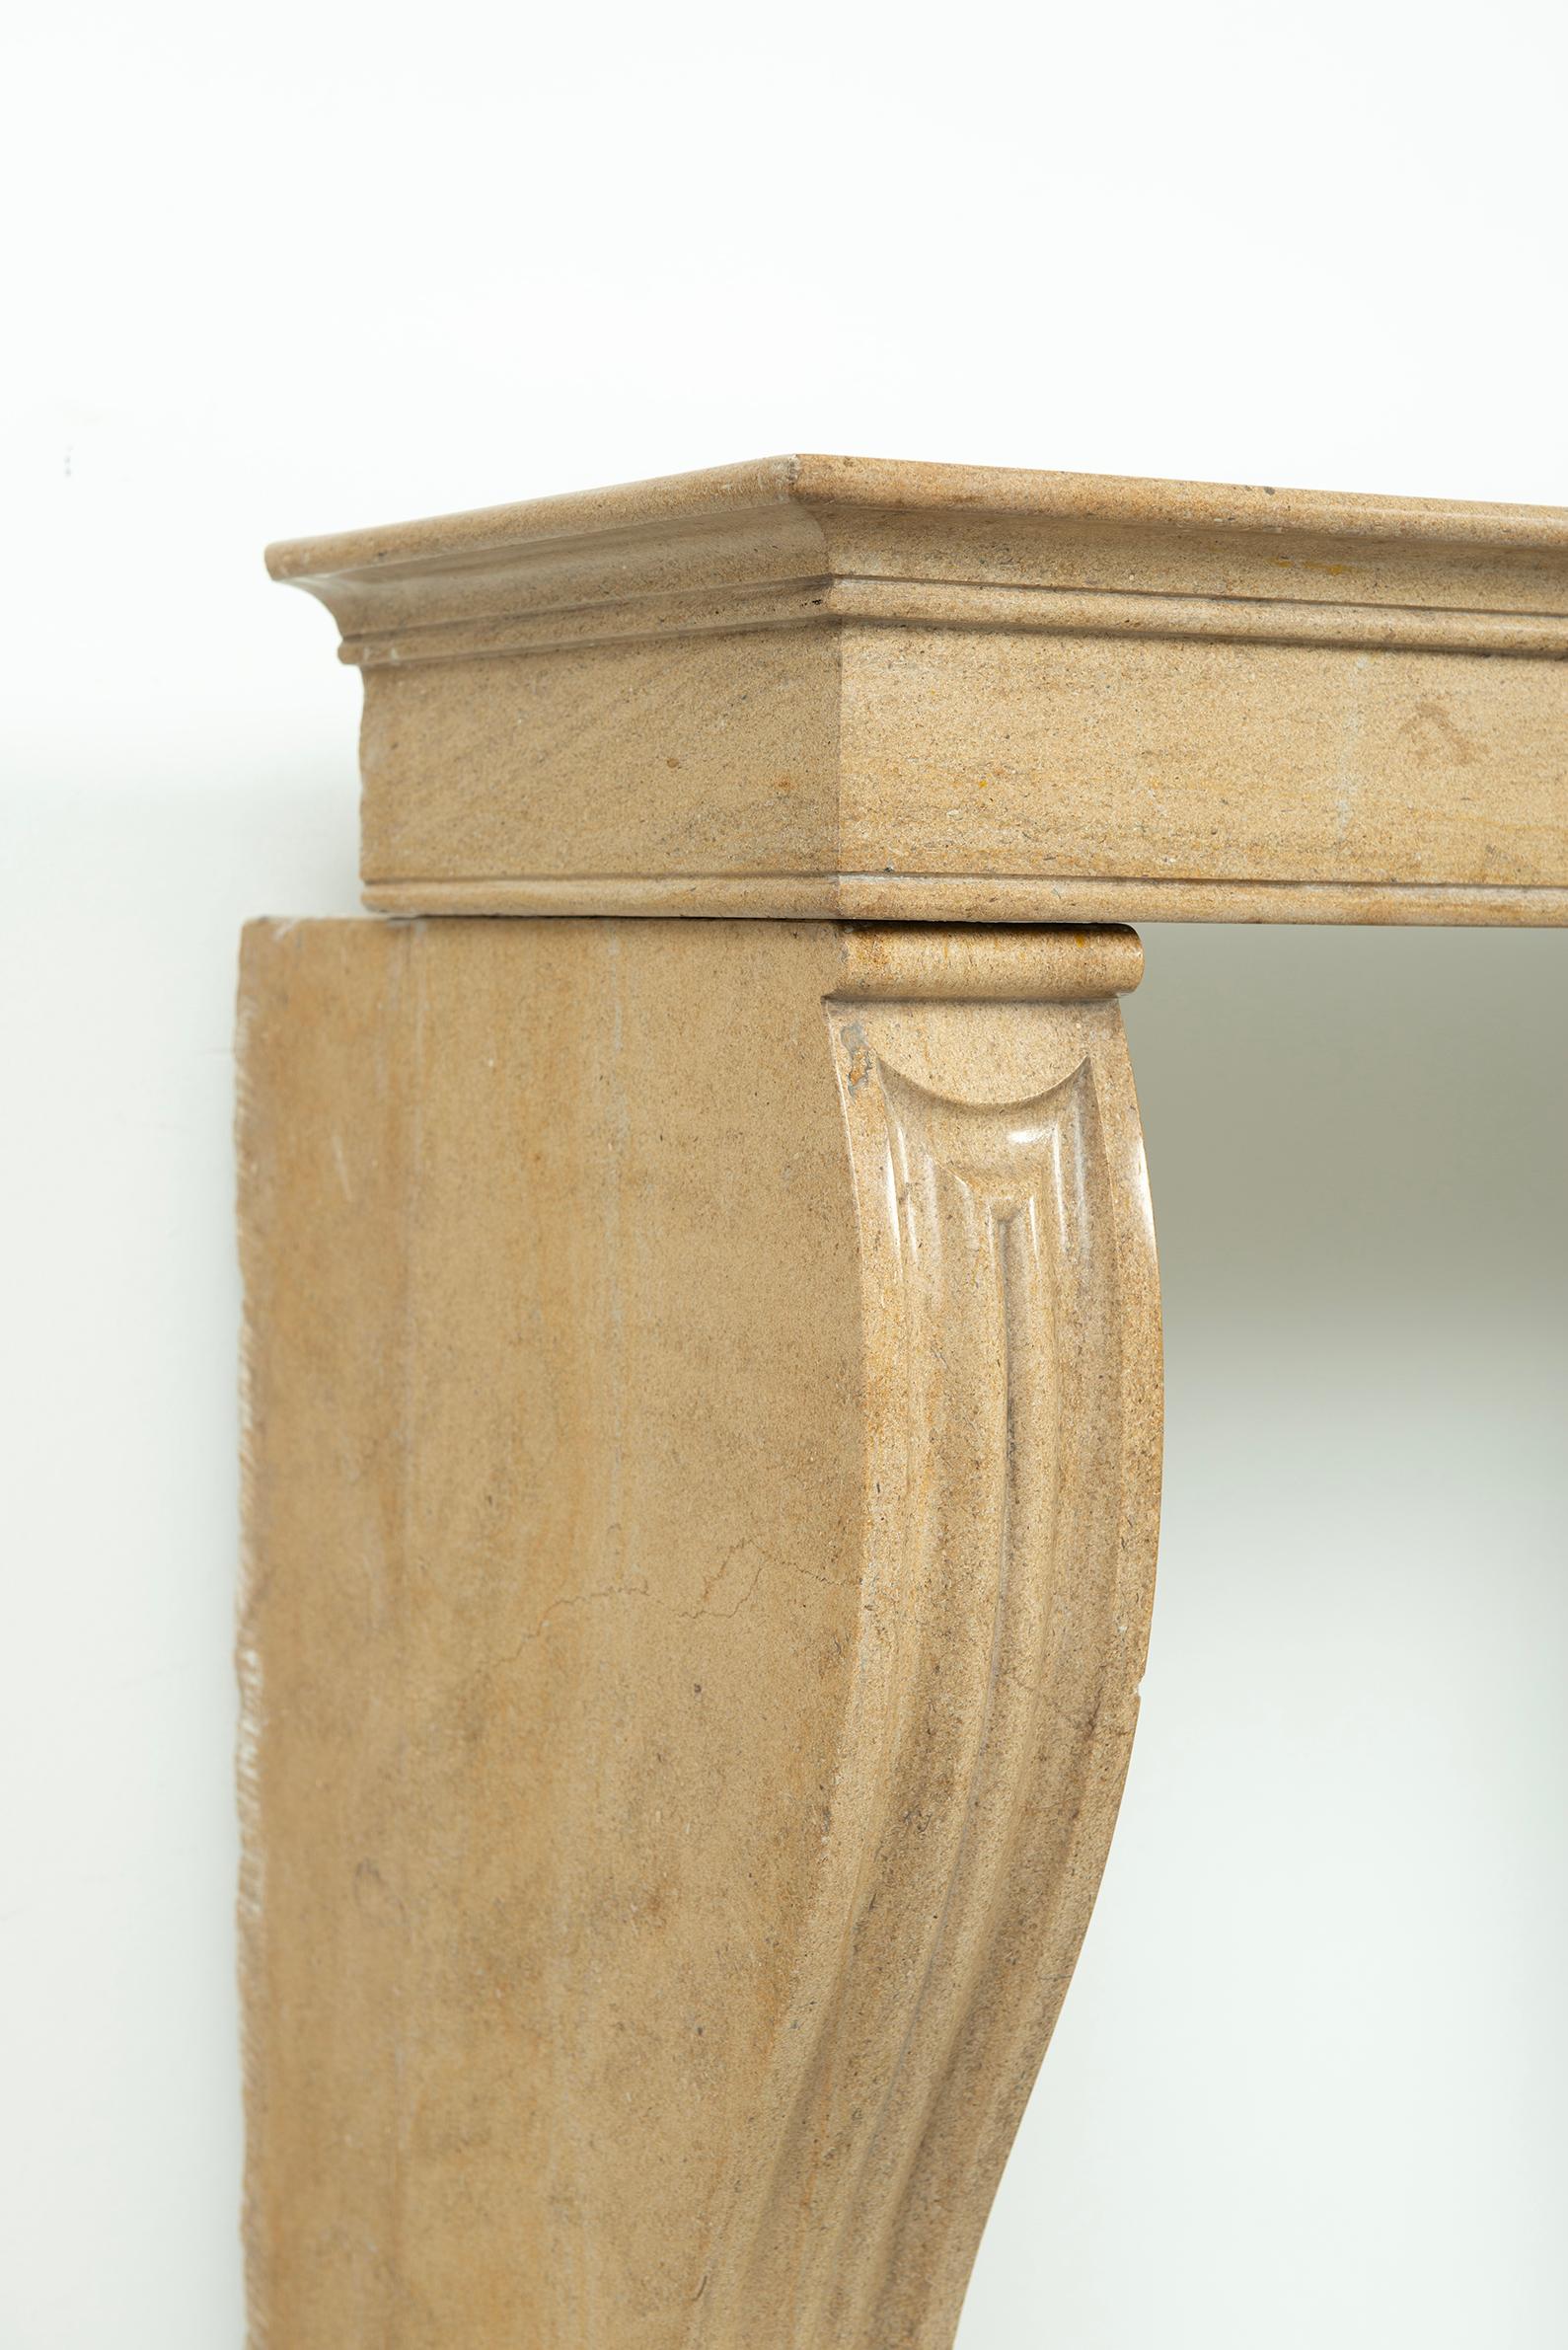 Nice French Campagnard style fireplace mantel in lovely limestone.
This gem comes from central France, burgundy area.
Its perfect little size make it possible to install this mantel in almost any situation, the two slender paneled legs support a